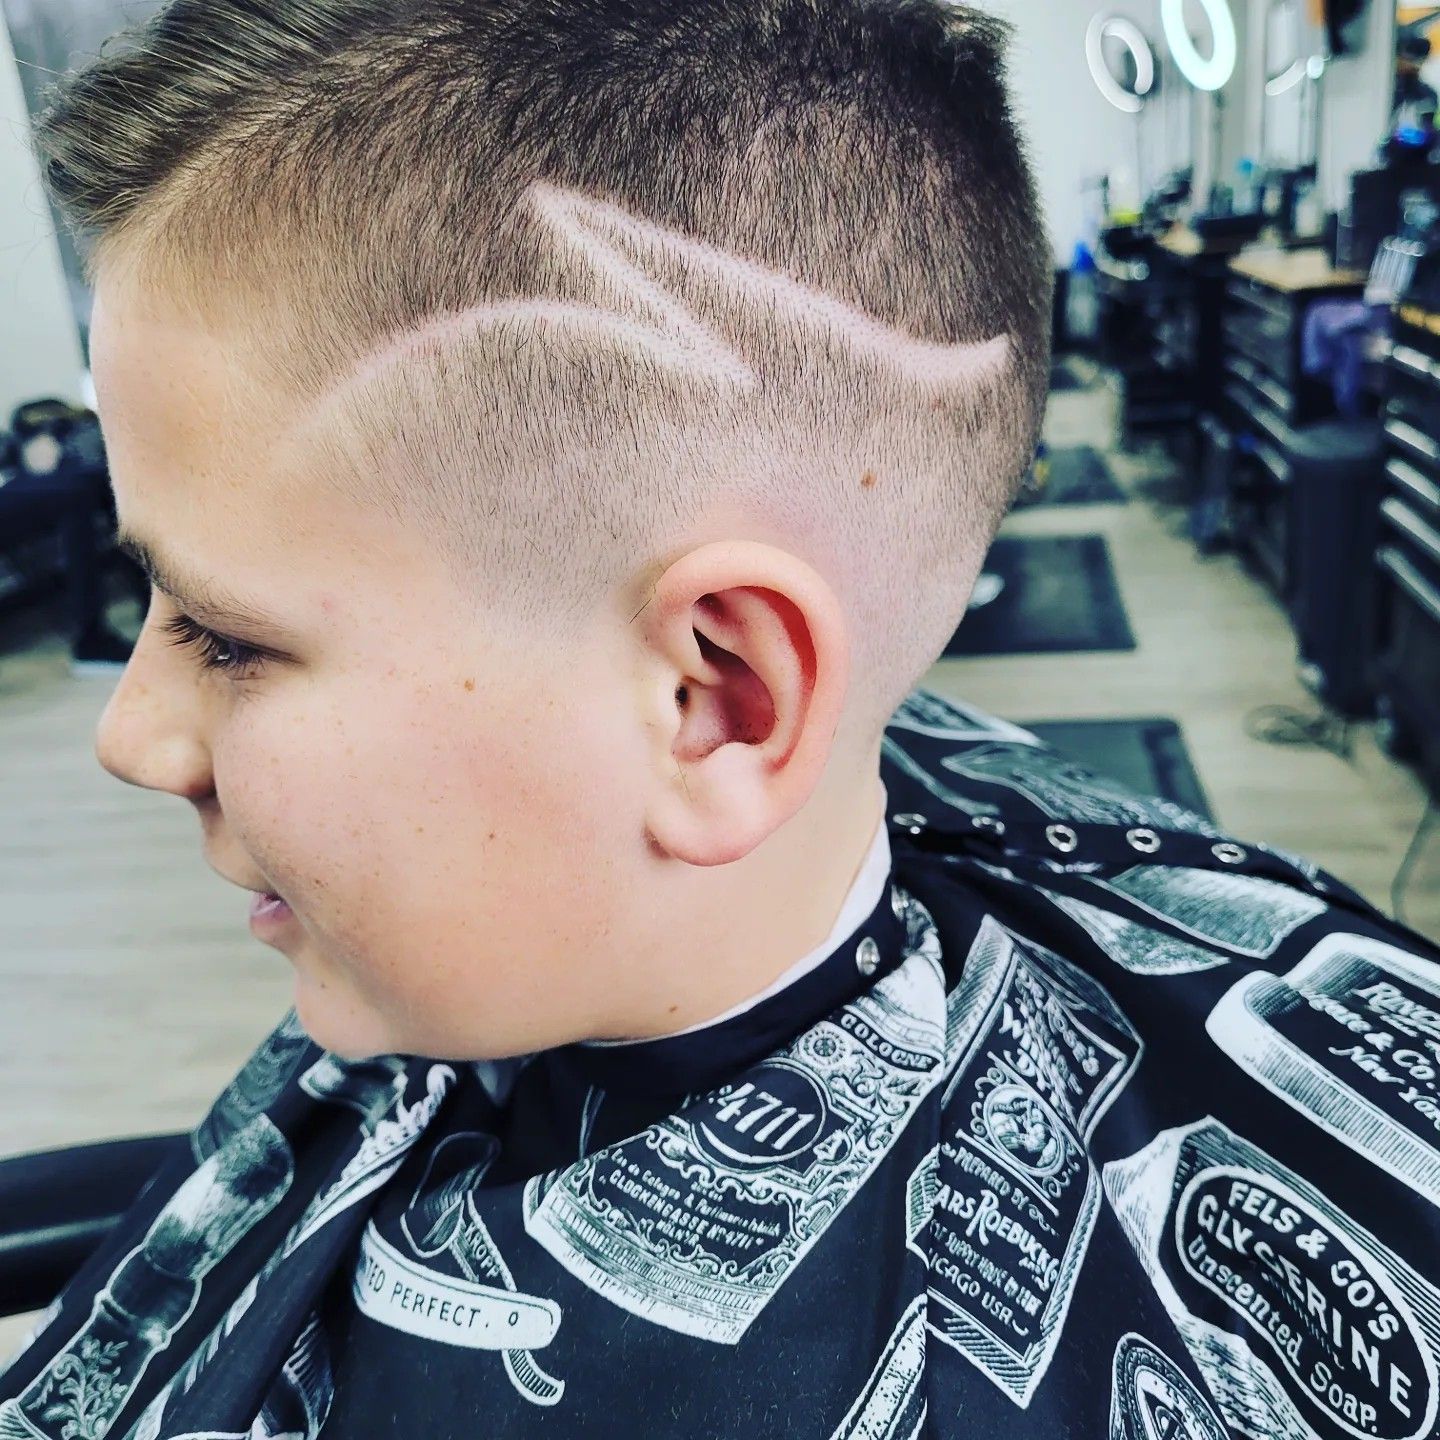 Abby @ A+Cuts, 808 W Wisconsin Ave, Appleton, 54914